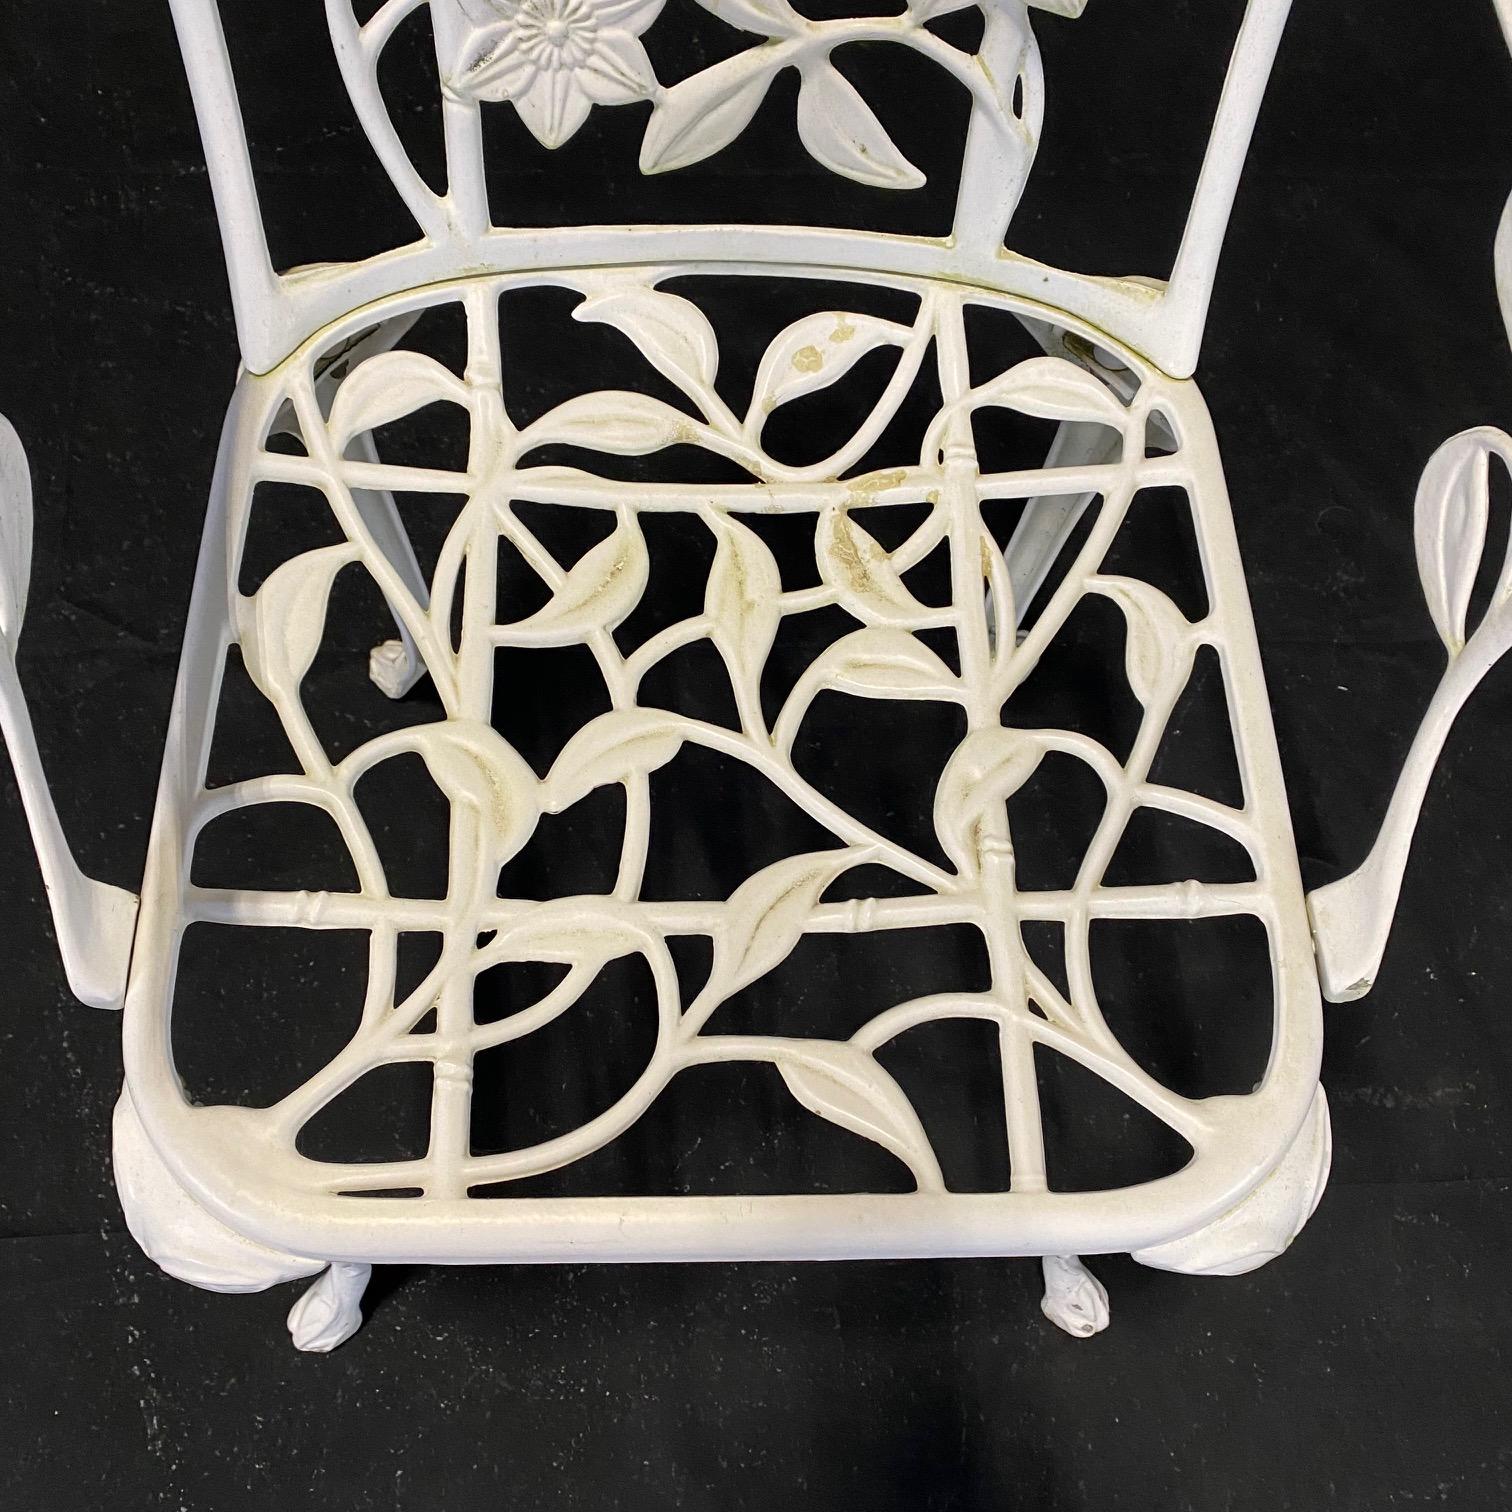 Vintage 5 Piece Set of English Nova Garden Patio Furniture with Vines and Leaves For Sale 3